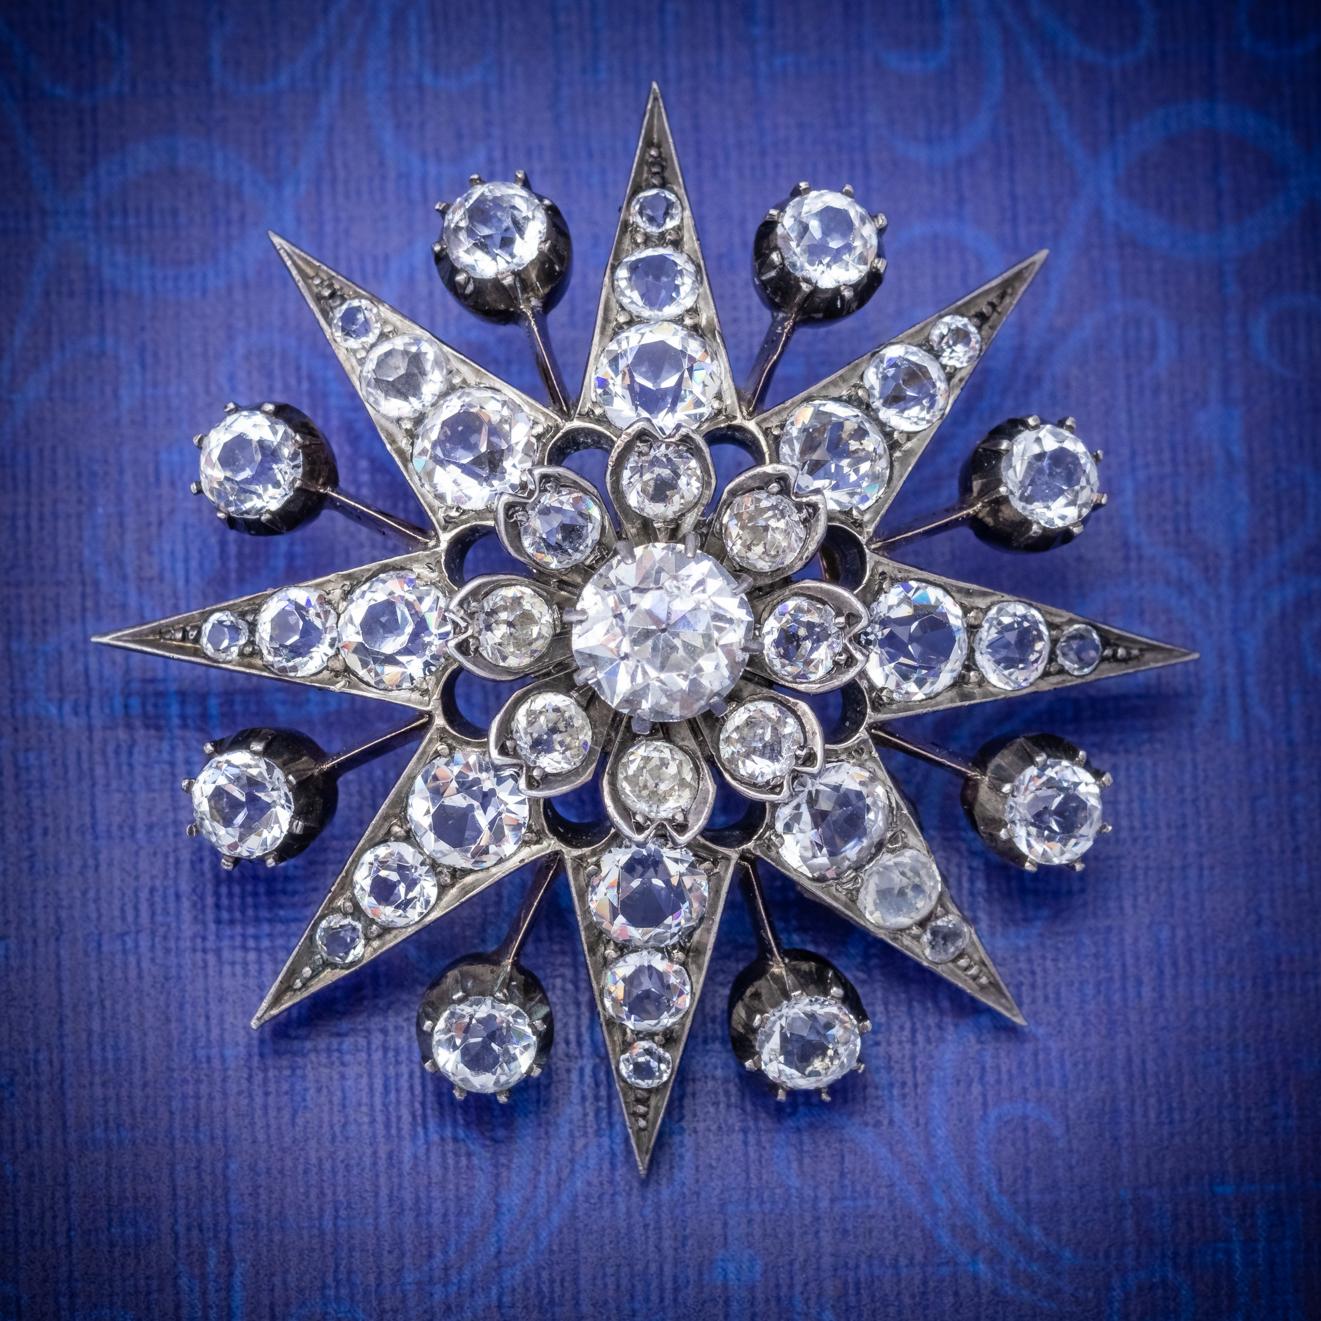 A wonderful antique Victorian six-pointed star brooch decorated with a sparkling array of Paste Stones that simulate Diamonds and shimmer beautifully in the light.

The Stones graduate in size from the centre out with the largest weighing